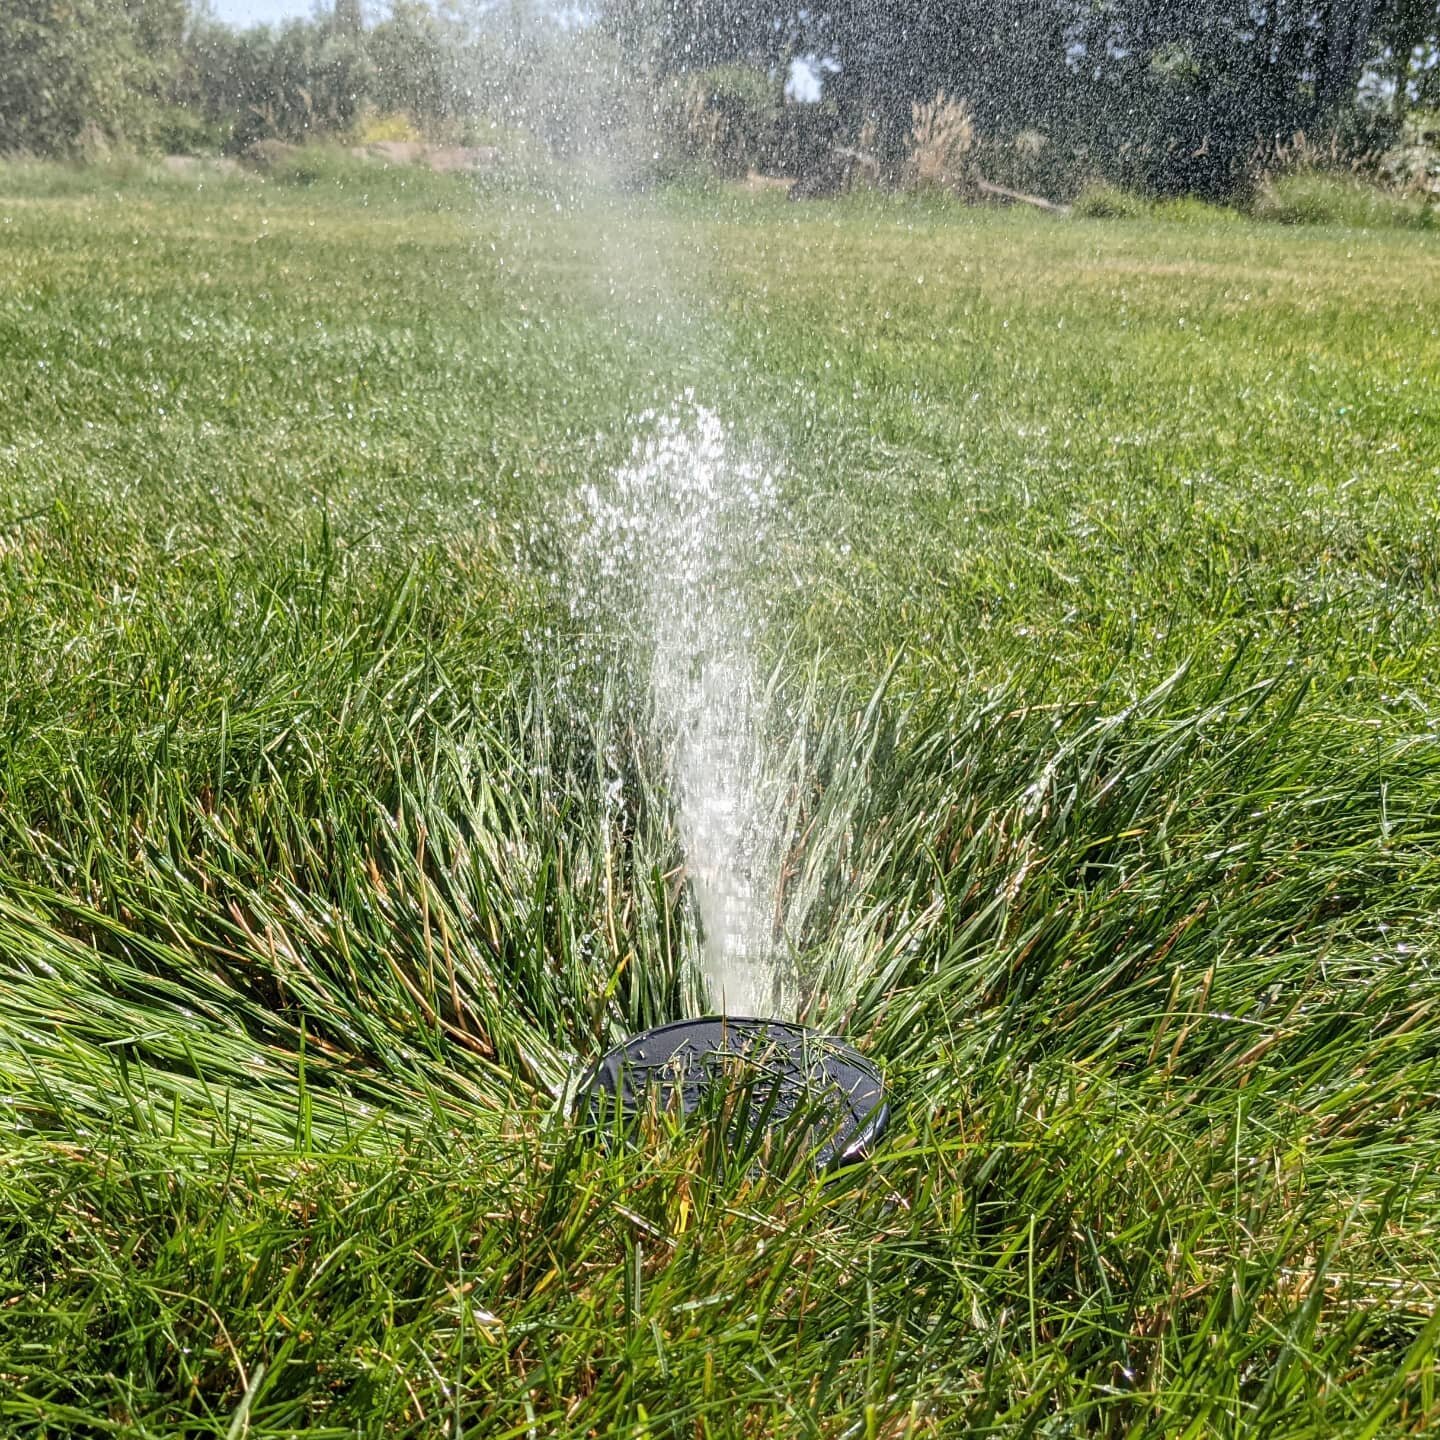 Sunken heads affect uniformity and runtimes are often increased to compensate for the inefficiency. Proper alignment improves distribution and conserves water #waterwhysirrigation #waterwhys